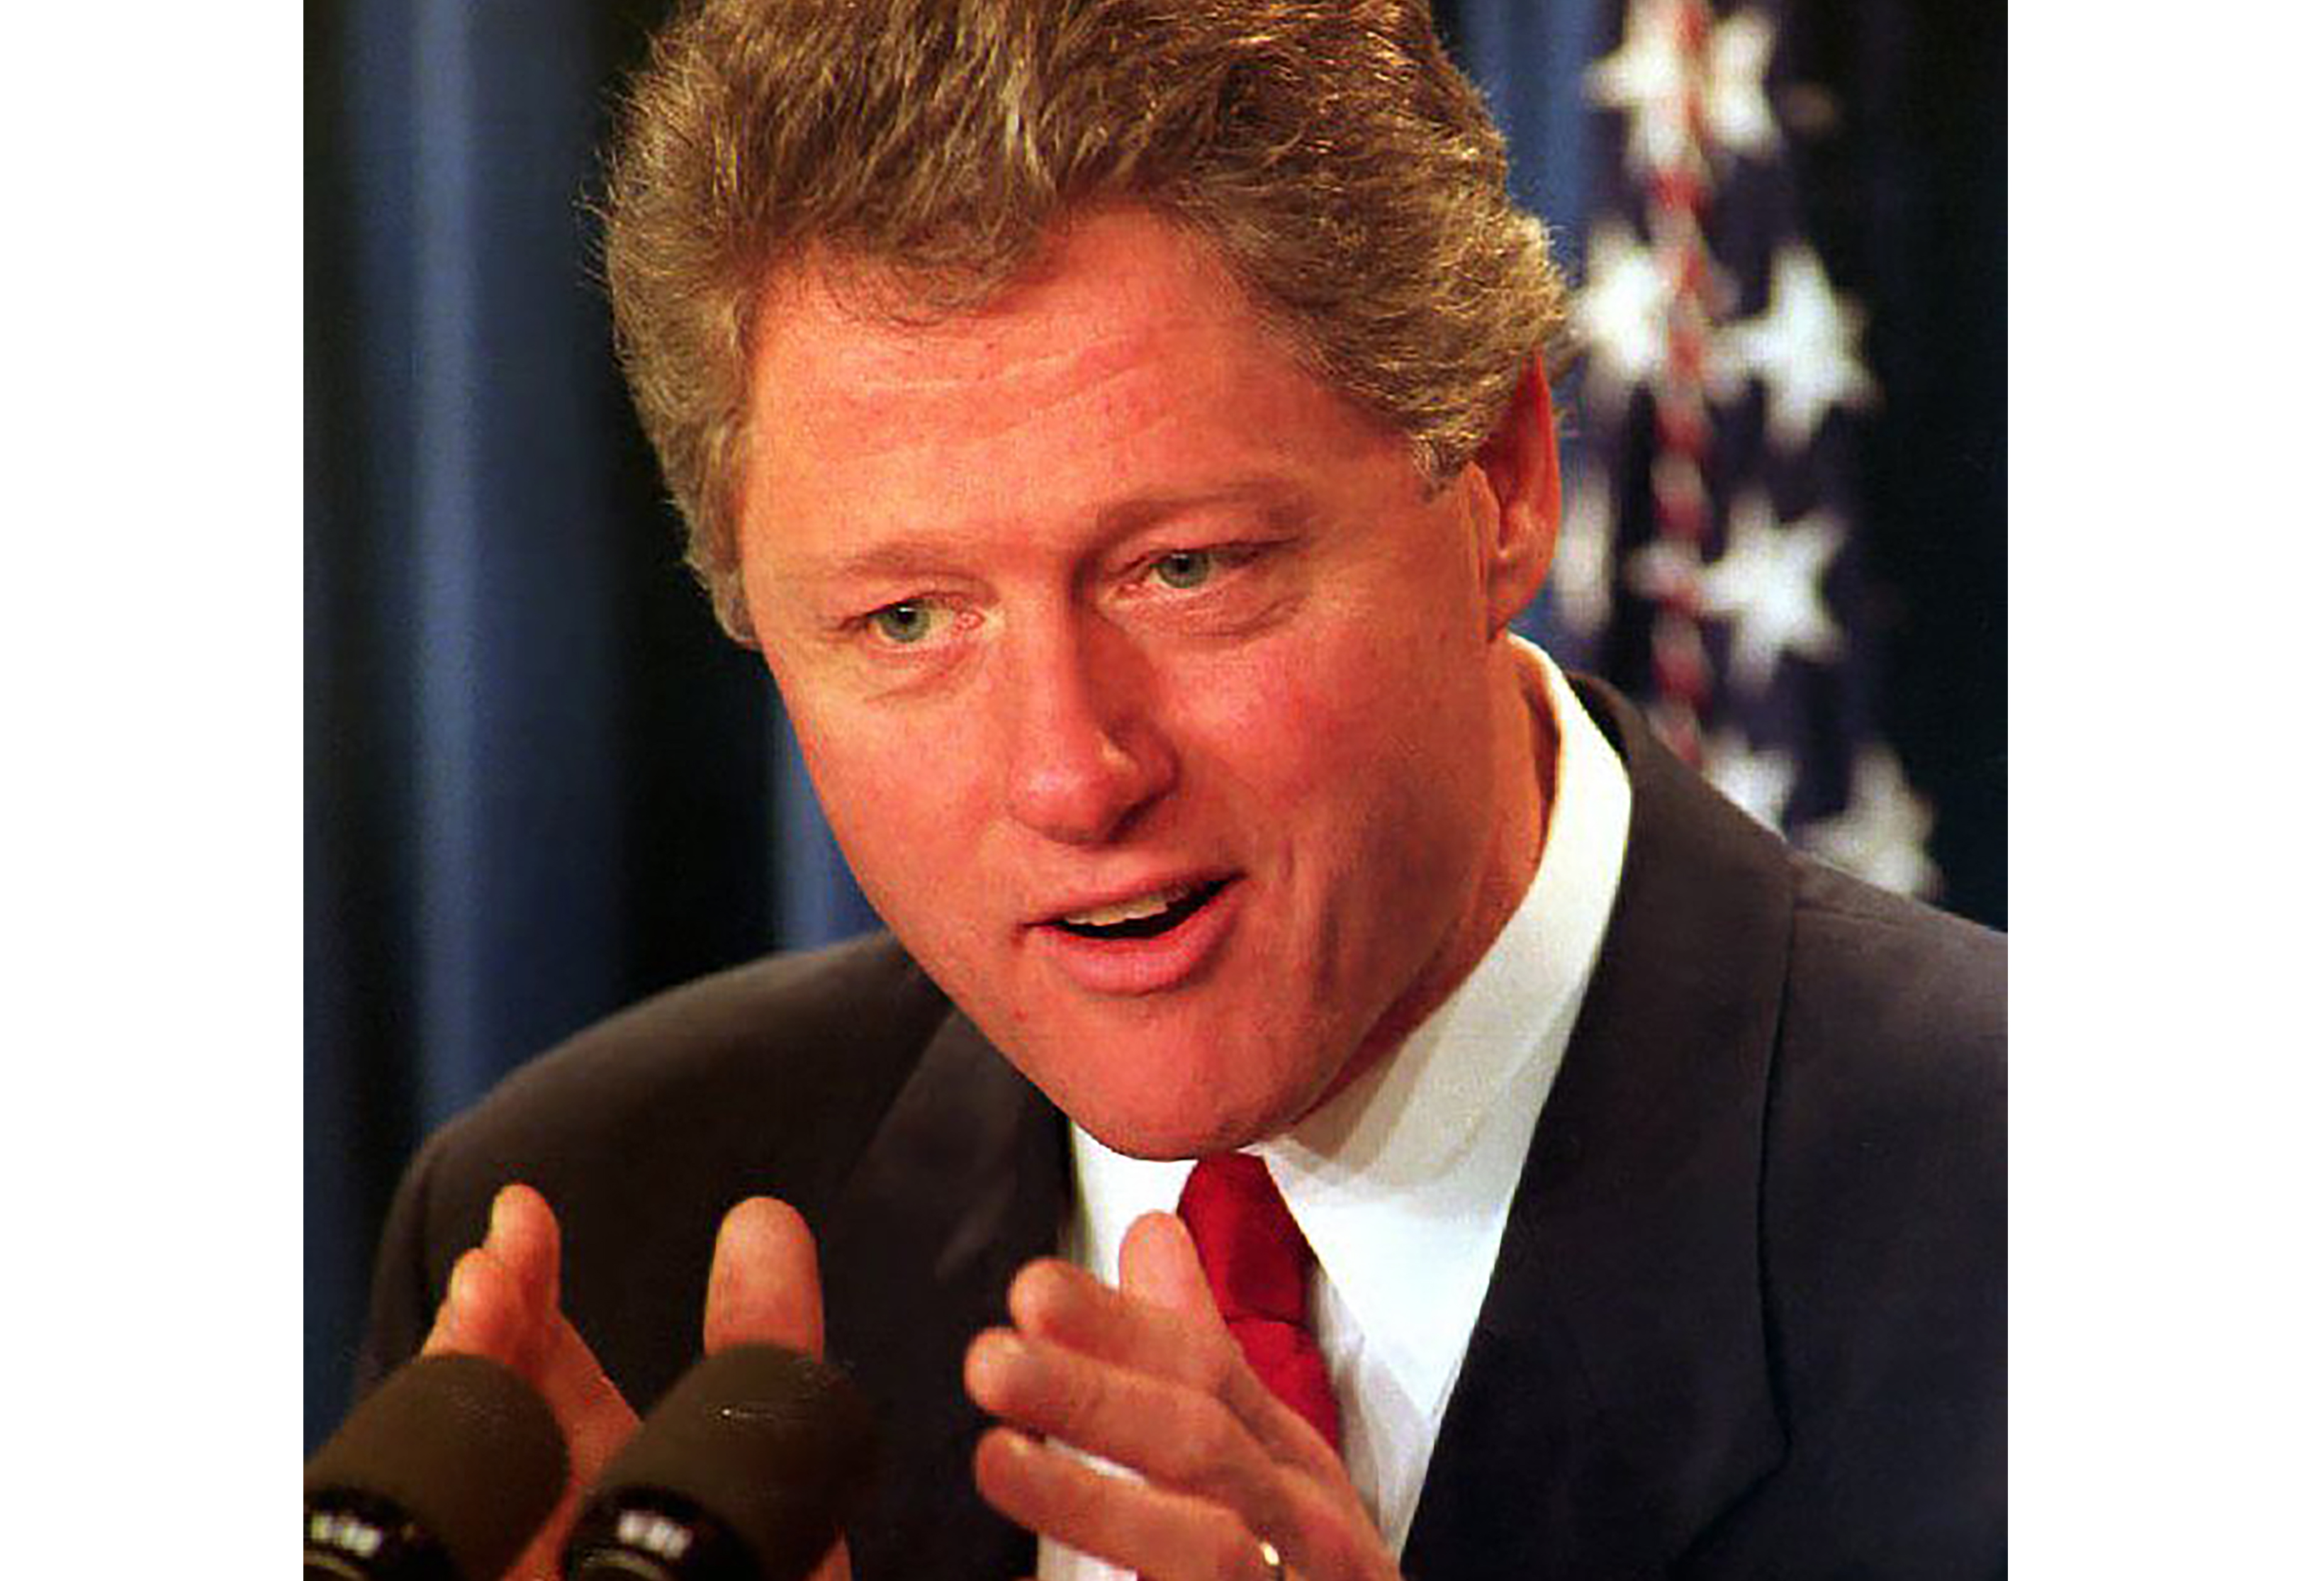 U.S. President Bill Clinton addresses the nation about his decision to lift a 50-year ban on homosexuals in the military on January 29, 1993. (DAVID AKE&mdash;AFP/Getty Images)